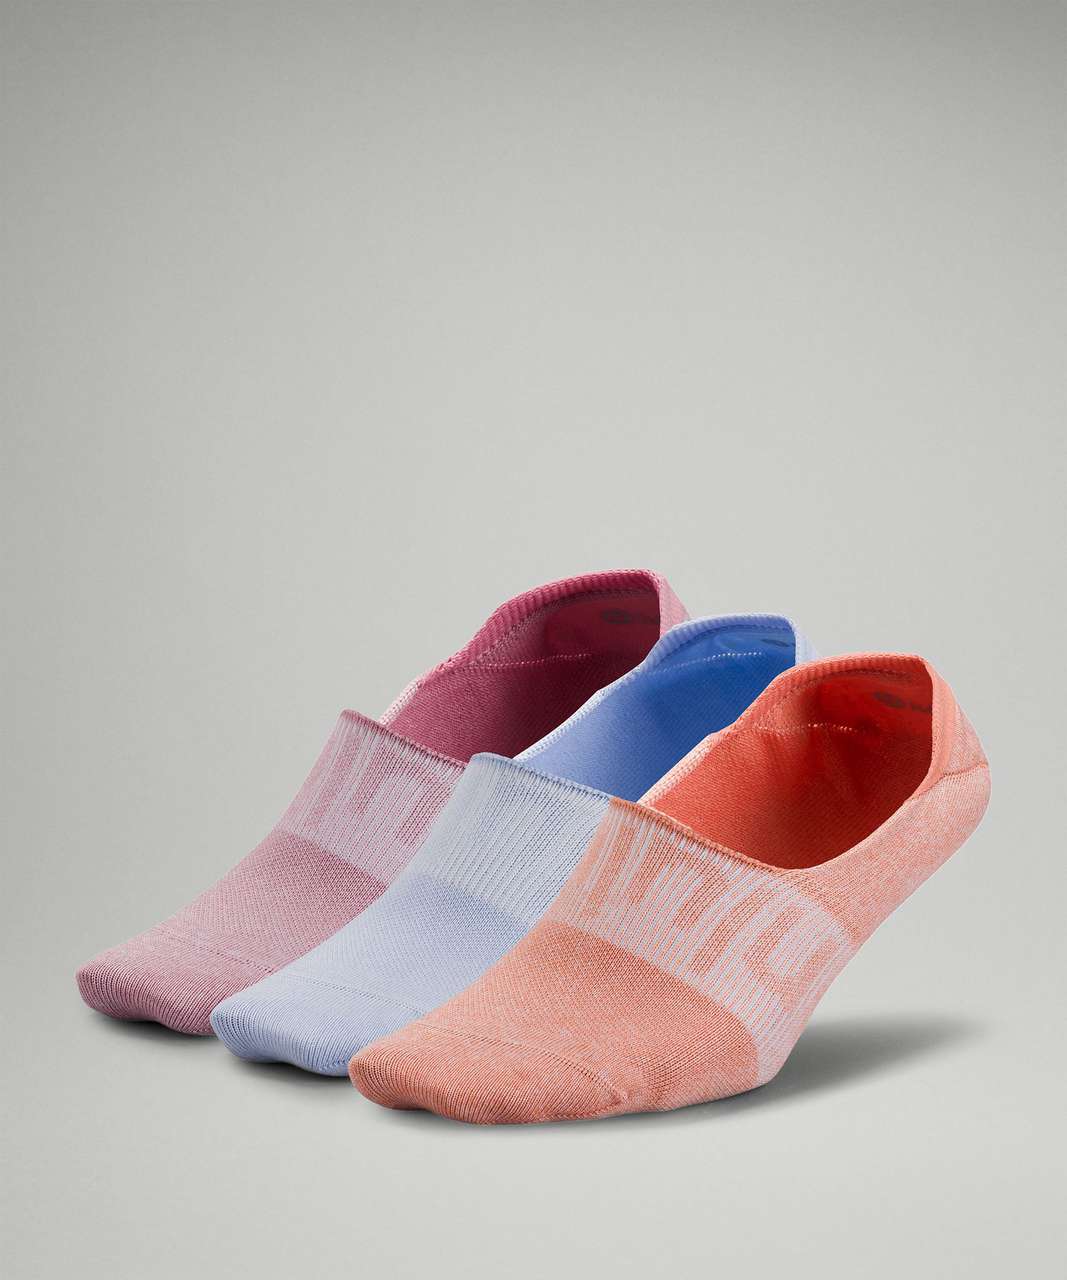 Lululemon Daily Stride No-Show Sock 3 Pack - Pink Taupe / Blue Linen / Pink Savannah